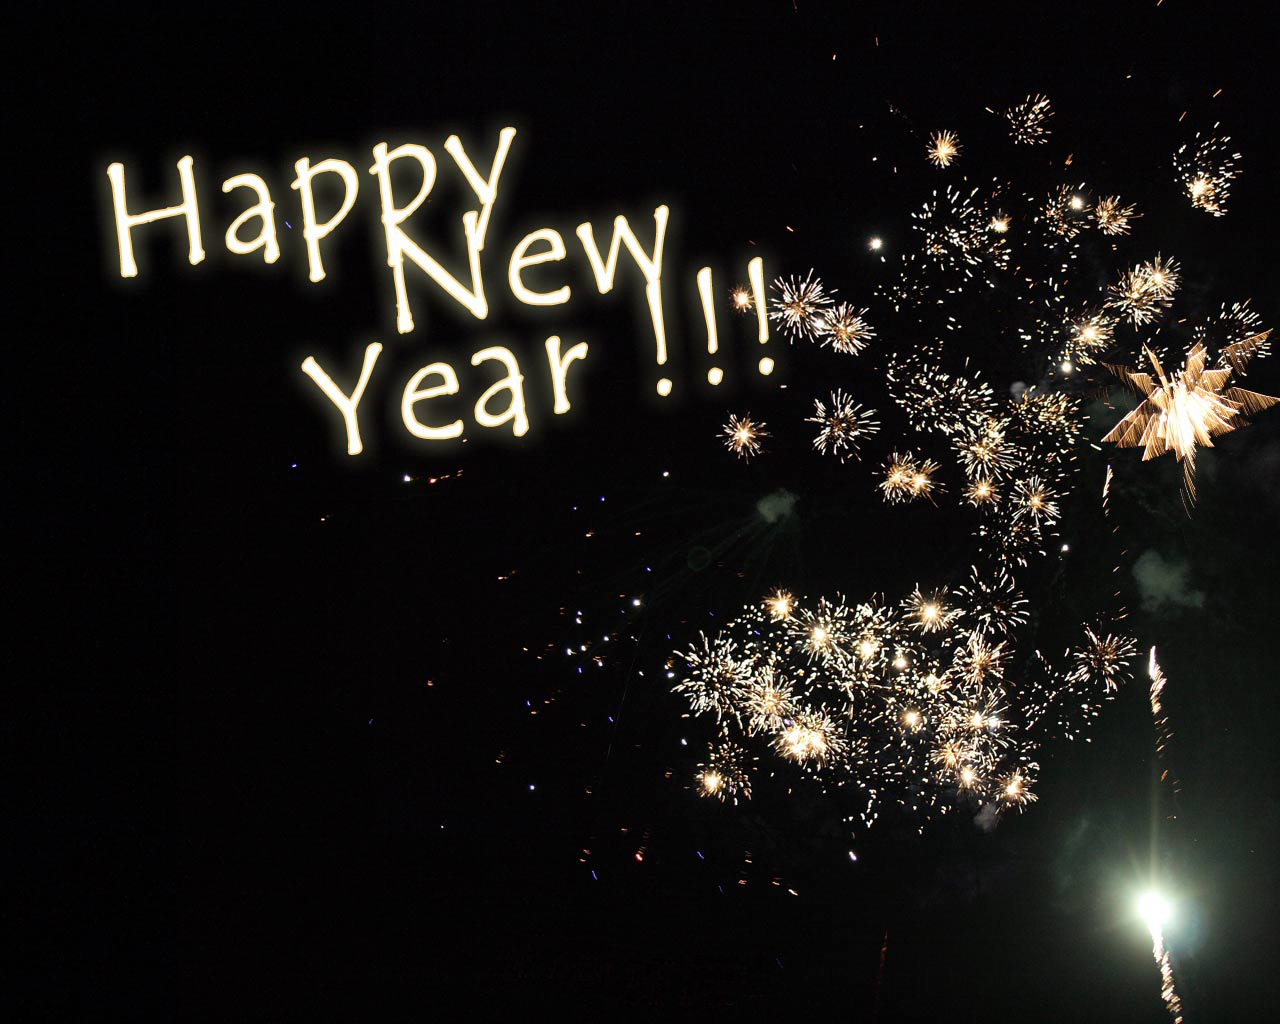 happy new year wallpaper,new years day,darkness,fireworks,text,midnight